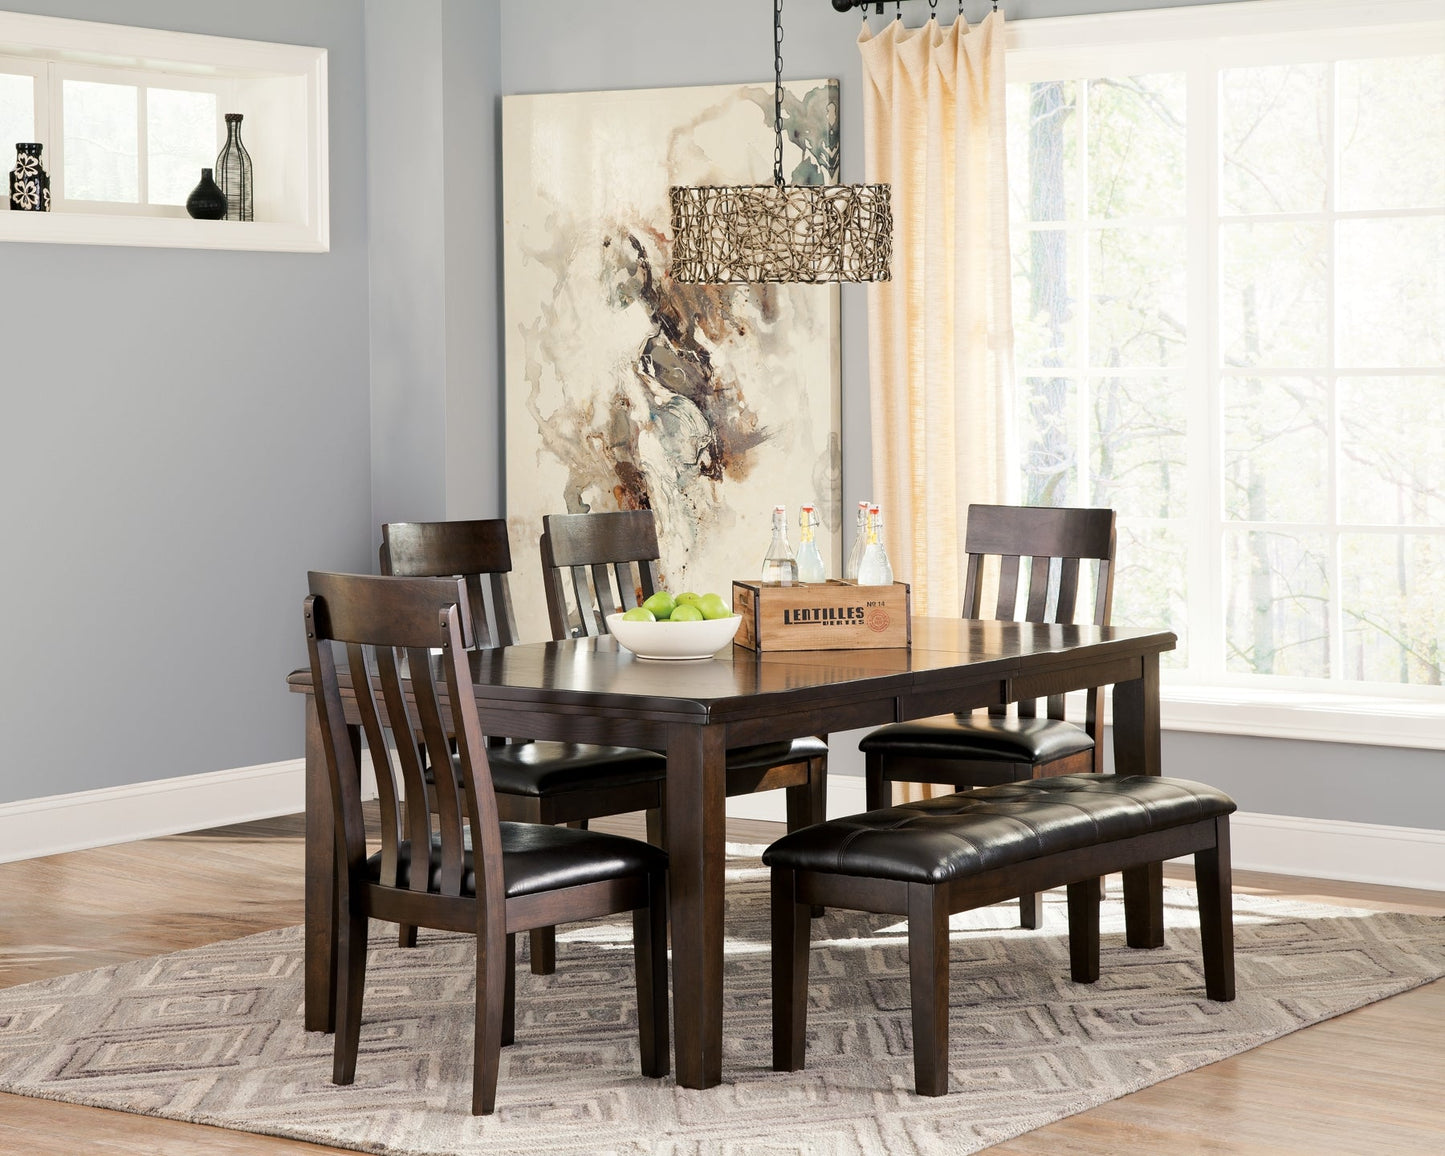 Haddigan Dining Table and 4 Chairs and Bench at Walker Mattress and Furniture Locations in Cedar Park and Belton TX.